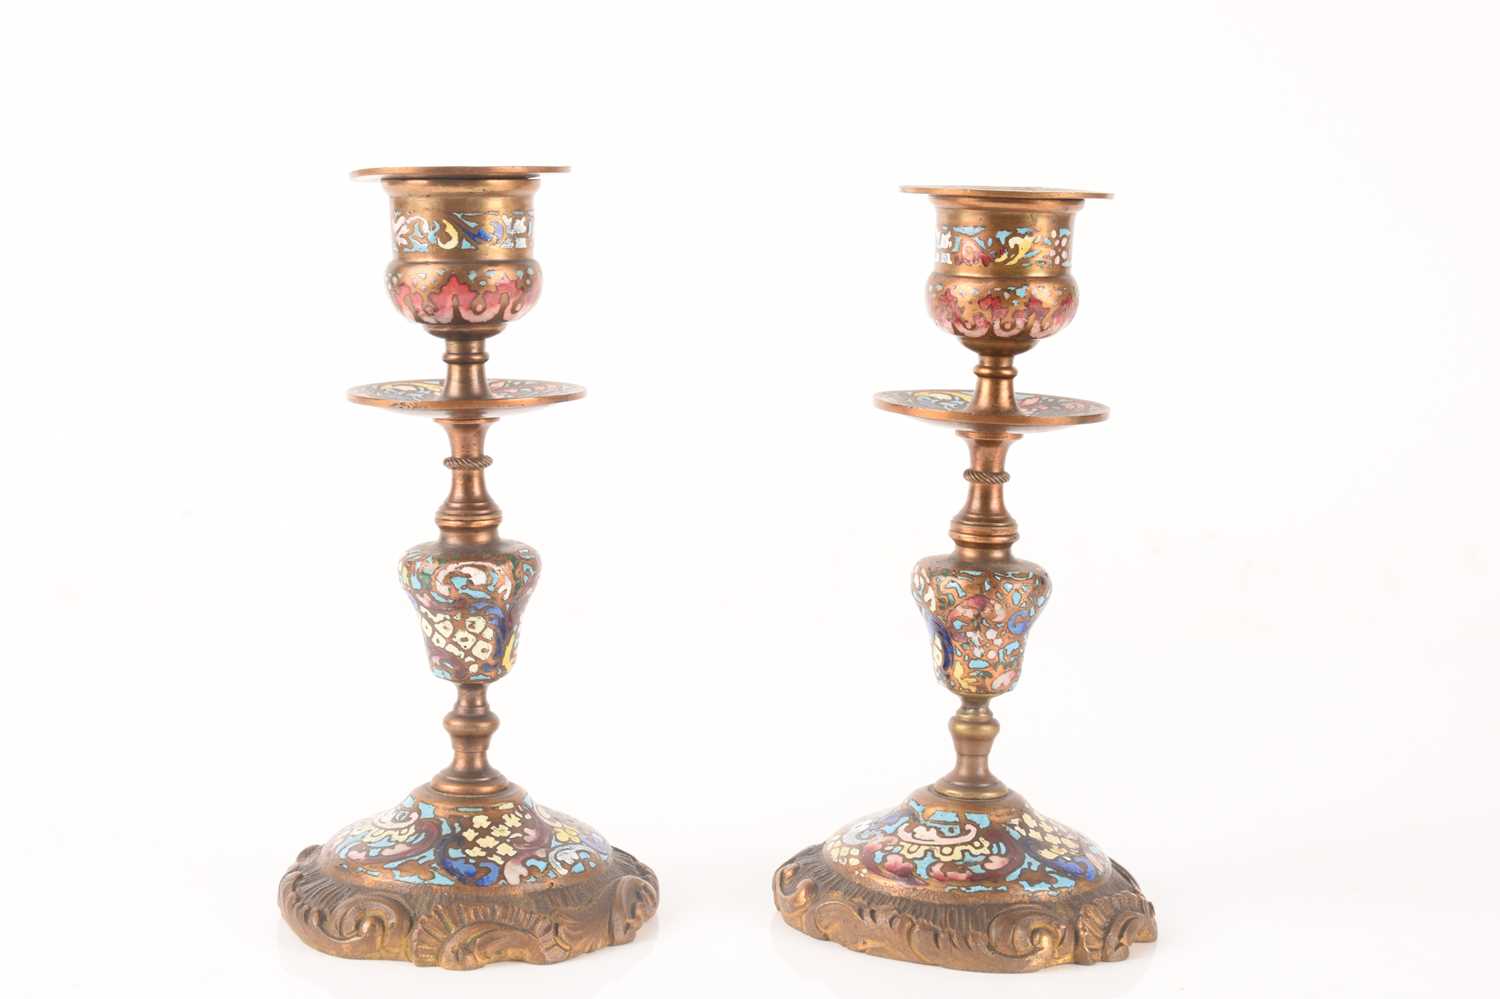 A late 19th-century French champléve enamel mantle clock with matching candlesticks, clock measures  - Image 12 of 16